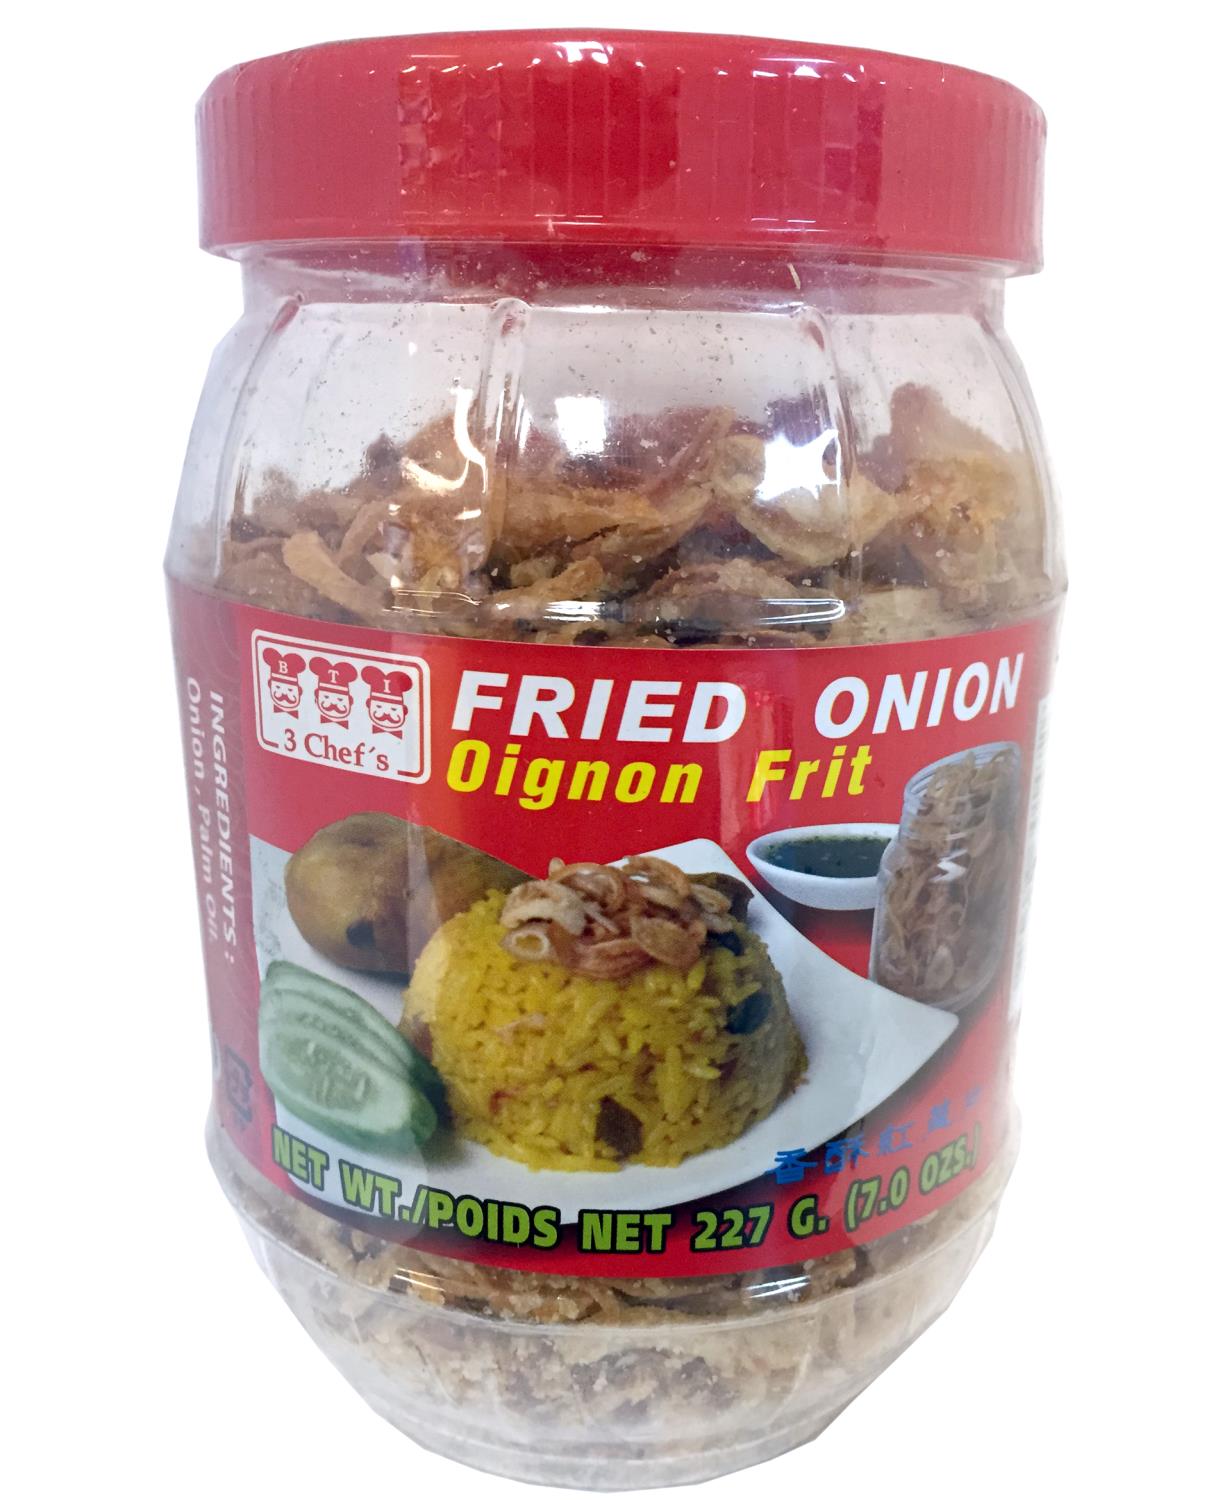 3 CHEF'S fried onion 227g TH